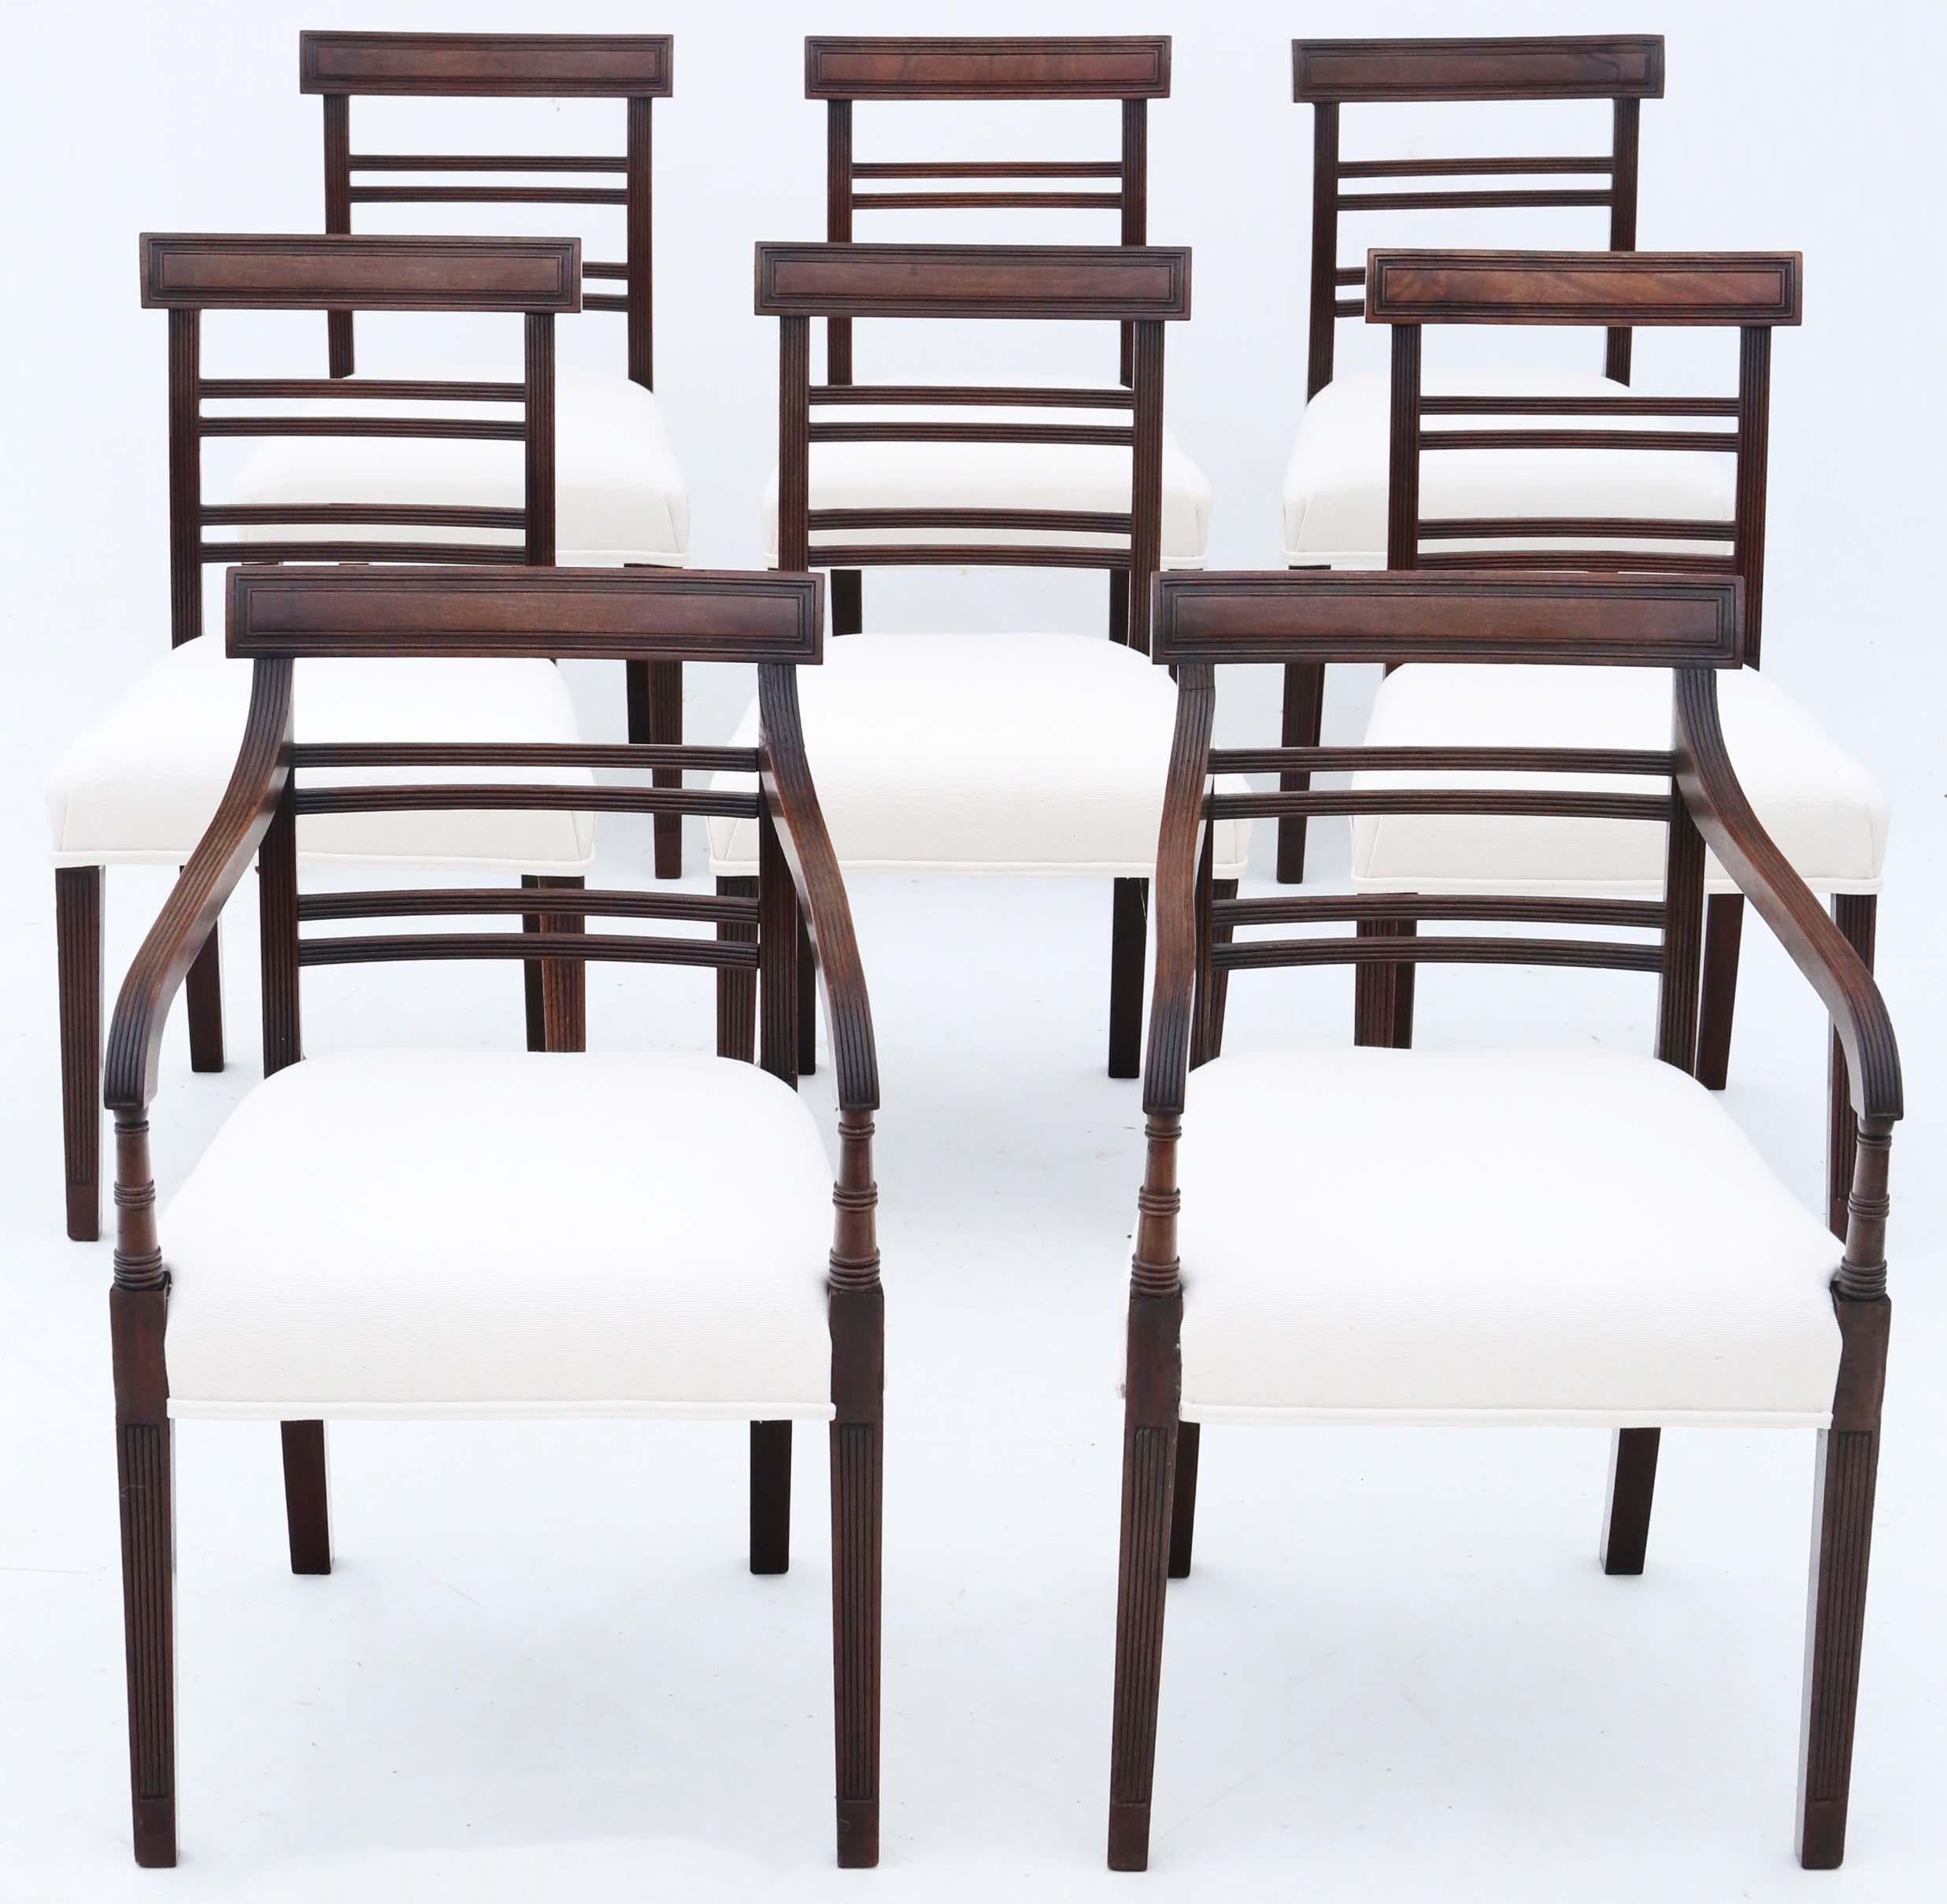 Embark on a journey back in time with this exceptional set of 8 (6 plus 2) early 19th Century mahogany dining chairs, originating from circa 1810. These chairs are a rare find, boasting a simple yet elegant design that epitomizes the sophistication